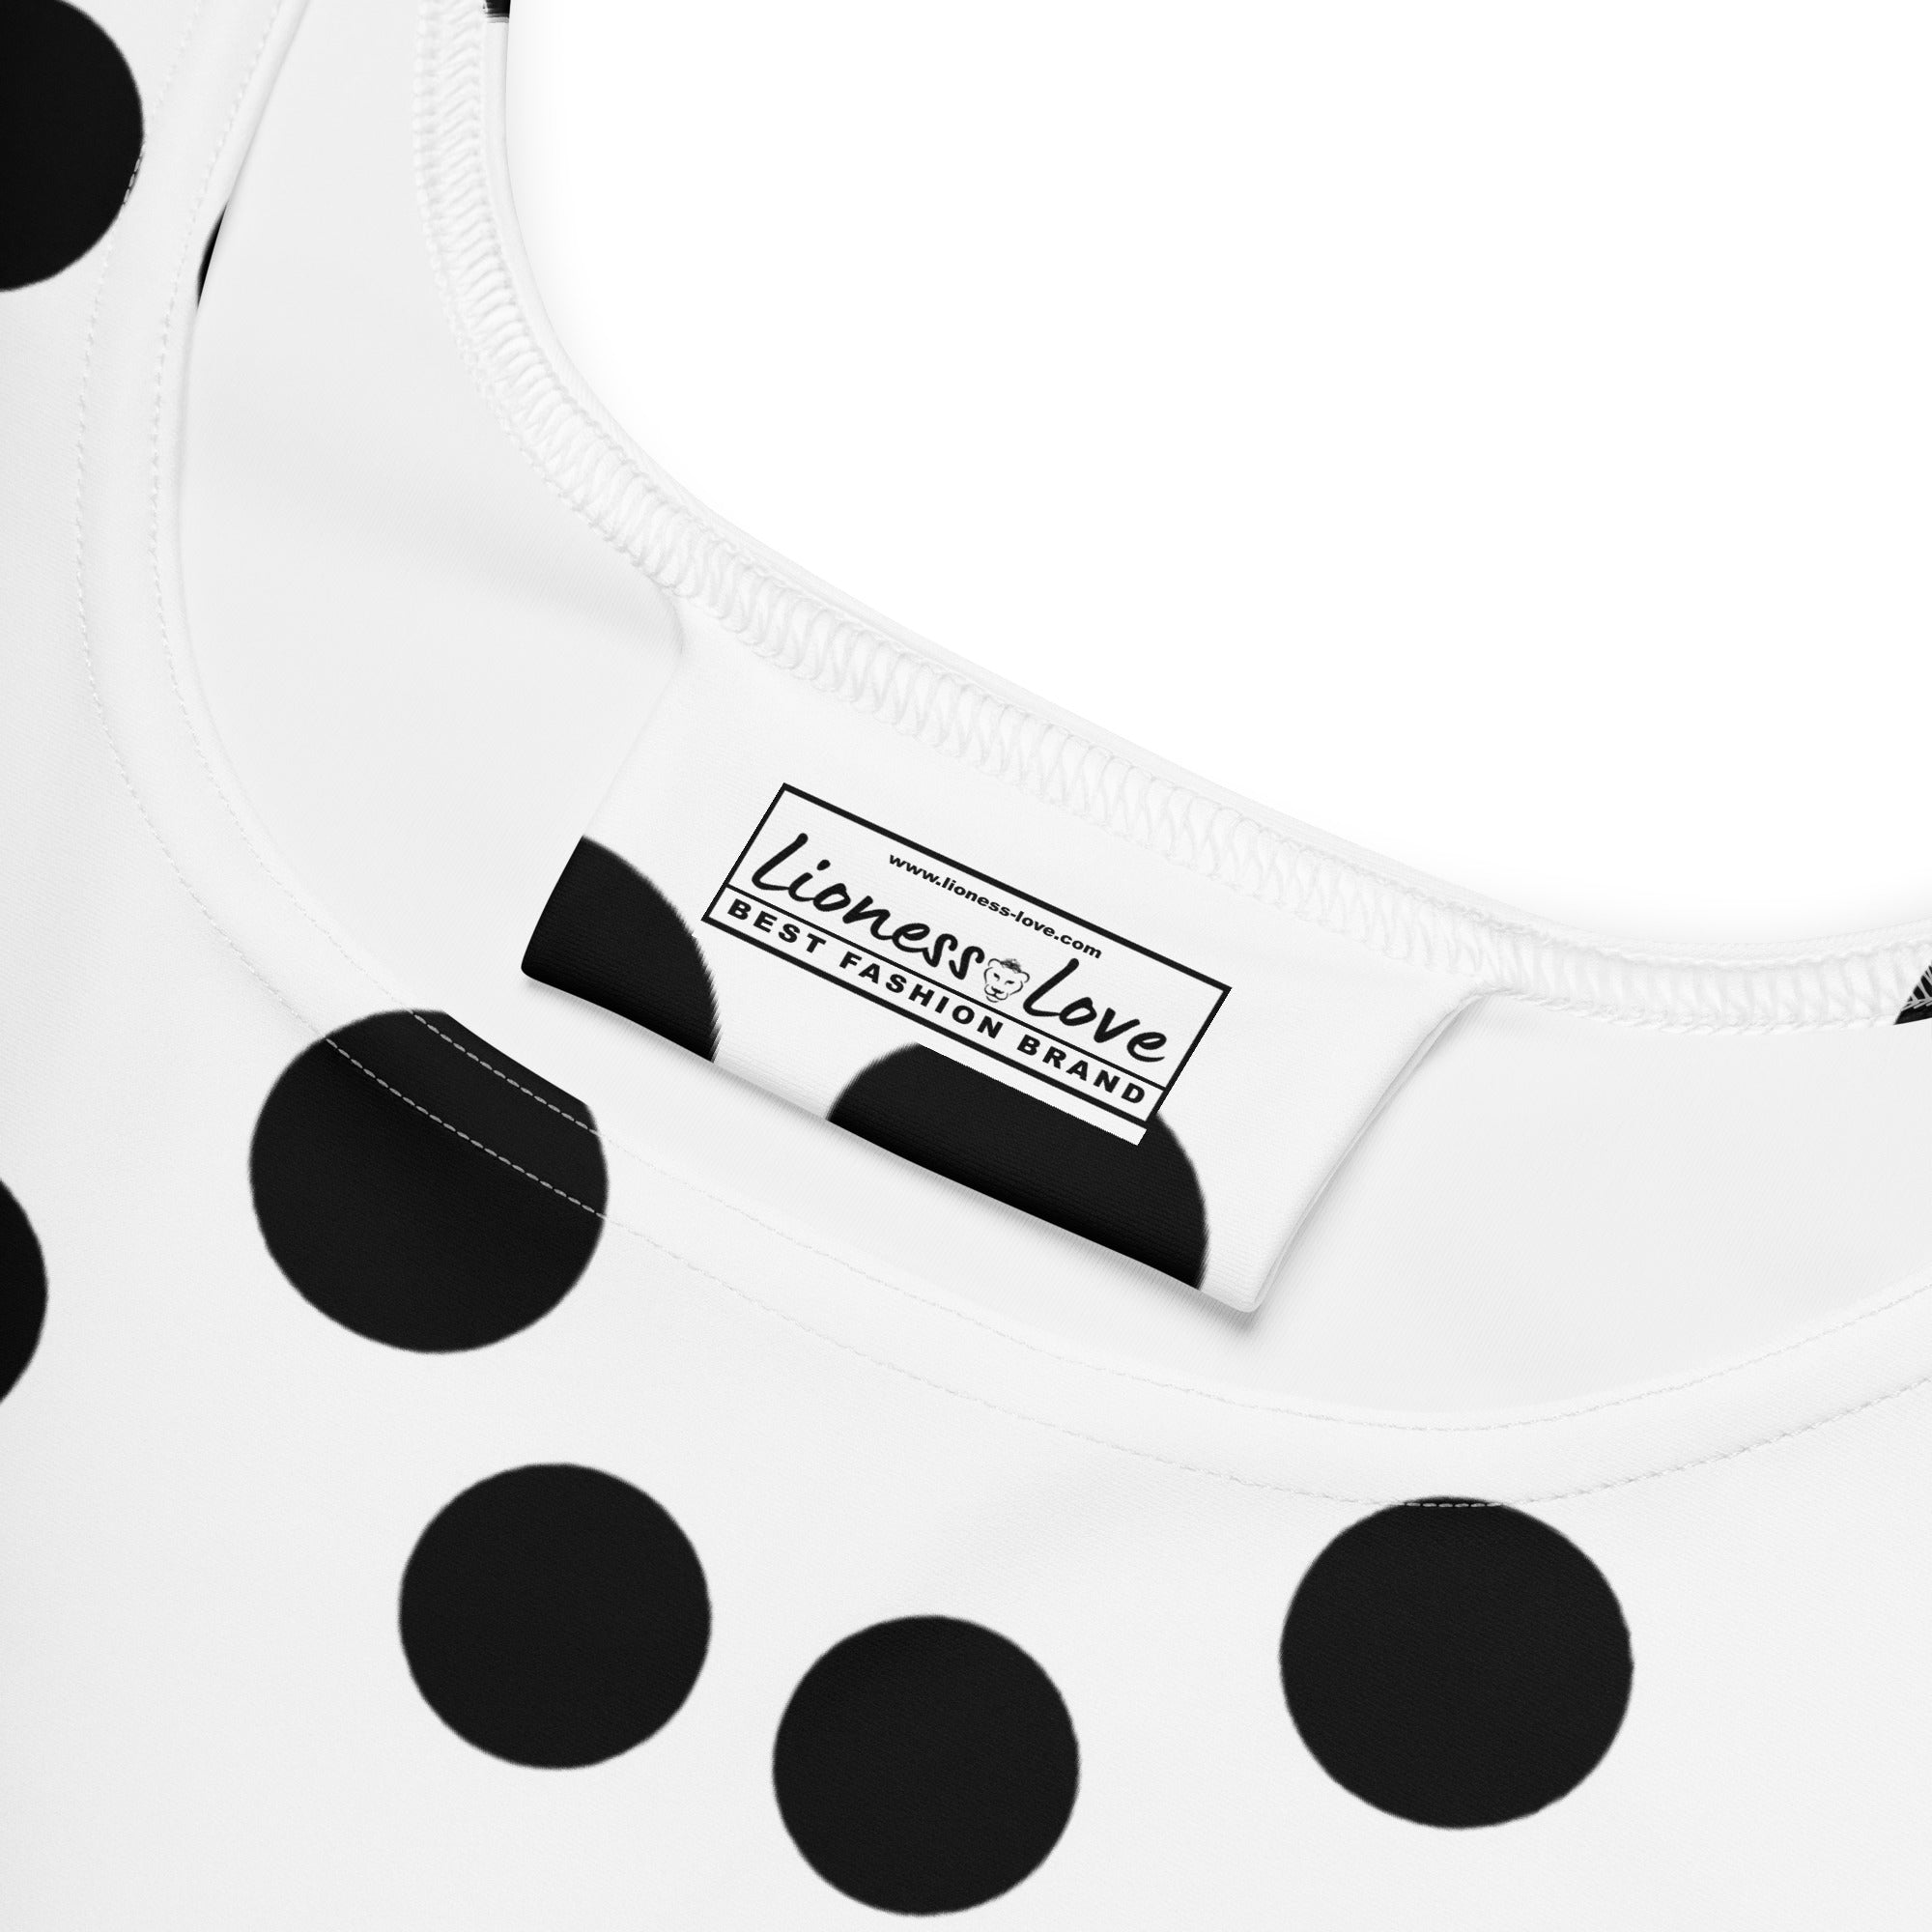 "Chic Whimsy: The Cute Black and White Polka Dot Skater Dress", lioness-love